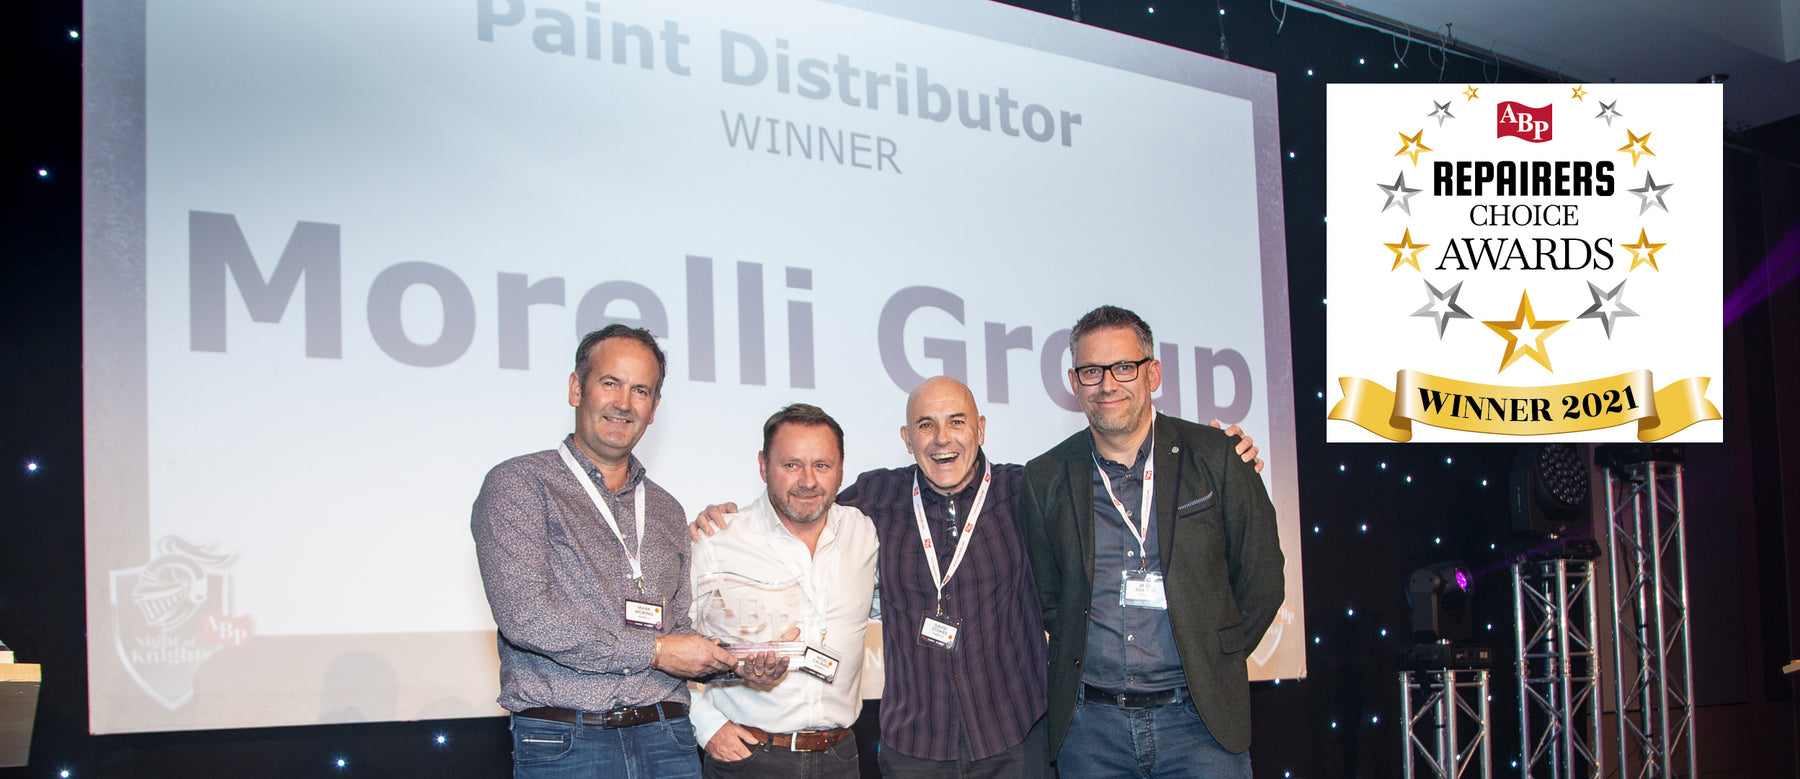 Morelli Group Wins Distributor of the Year 2021 at ABP Night of Knights